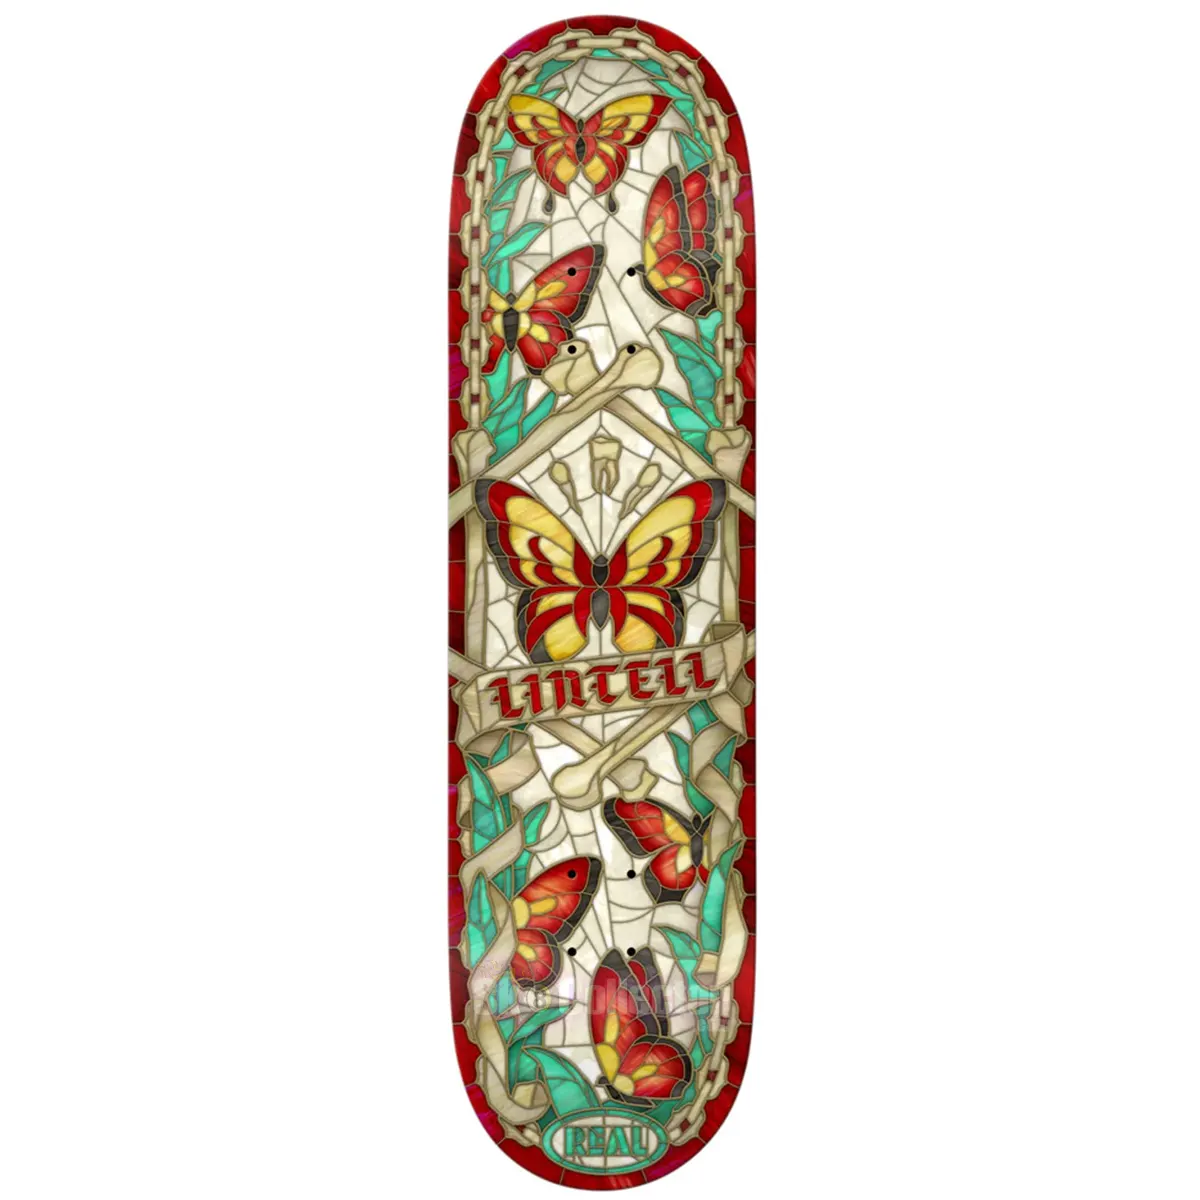 Real Lintell Cathedral Deck - Sk8 Collector